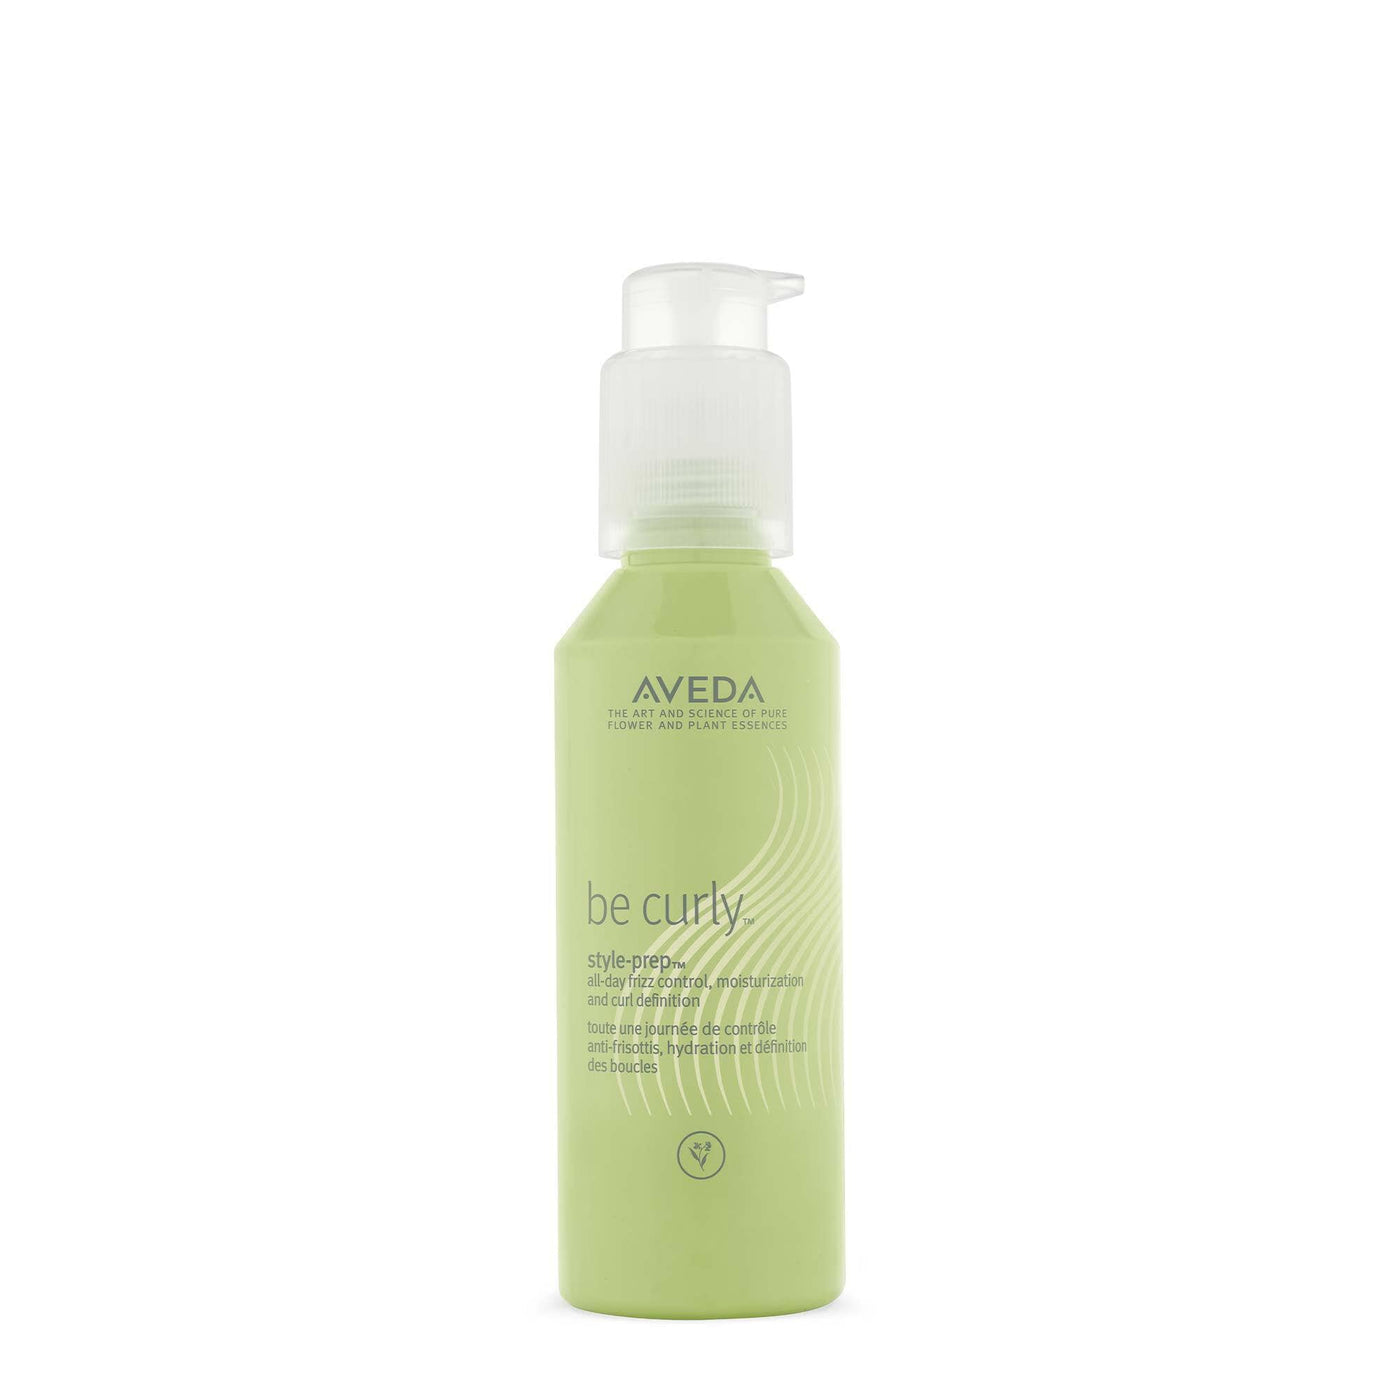 Aveda Styling Be curly style-prep 100ml